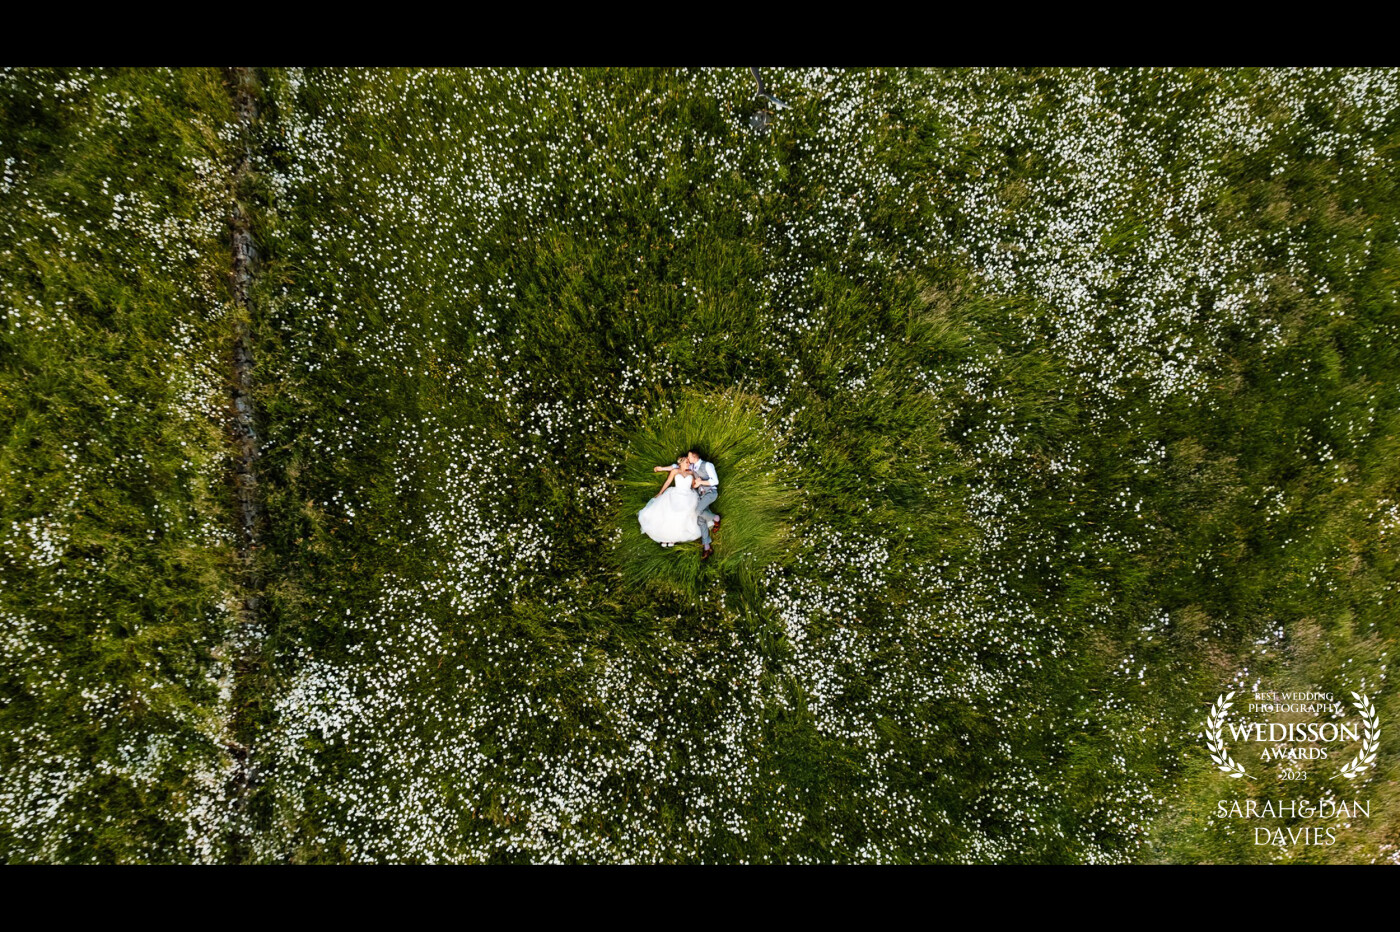 We saw this daisy field earlier in the day and knew it'd make a perfect drone shot and a chance for these two to have a few minutes alone